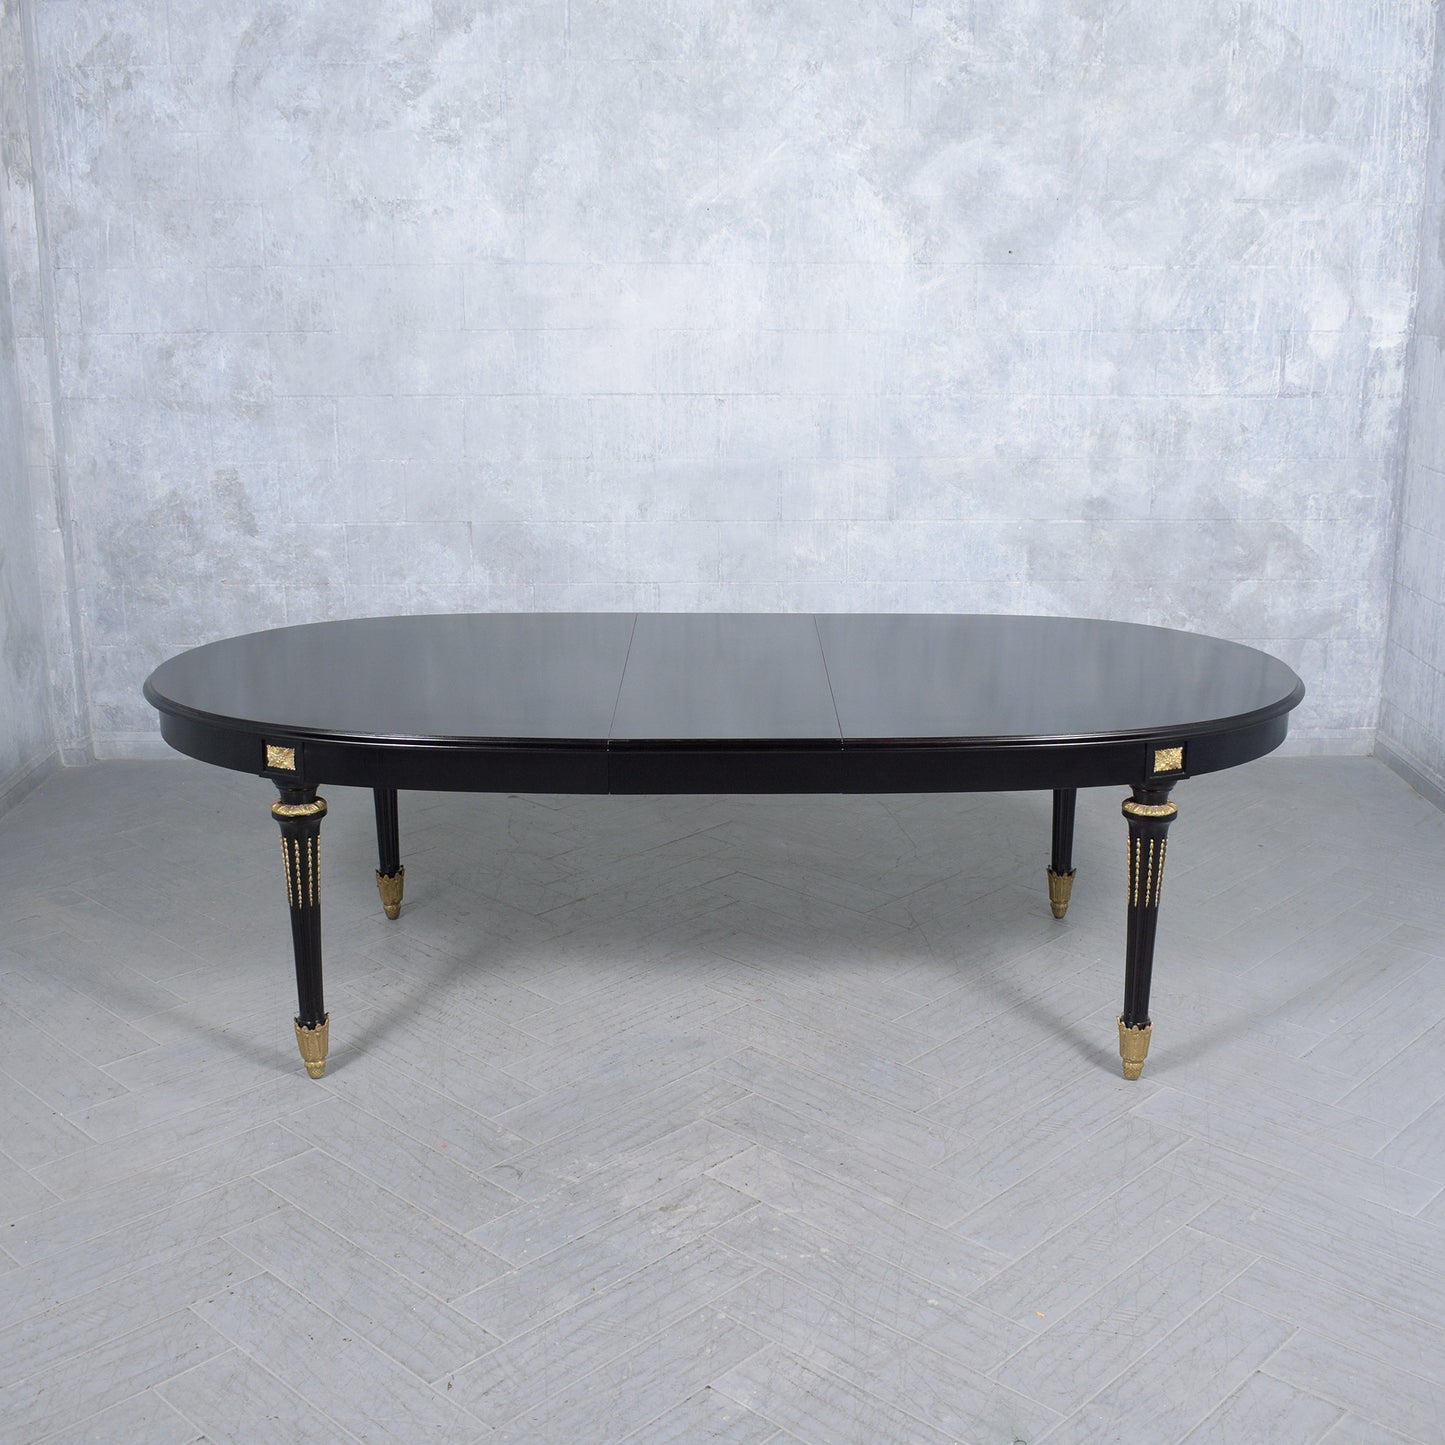 Stunning Louis XVI Style Mahogany Oval Dining Table with Brass Accents